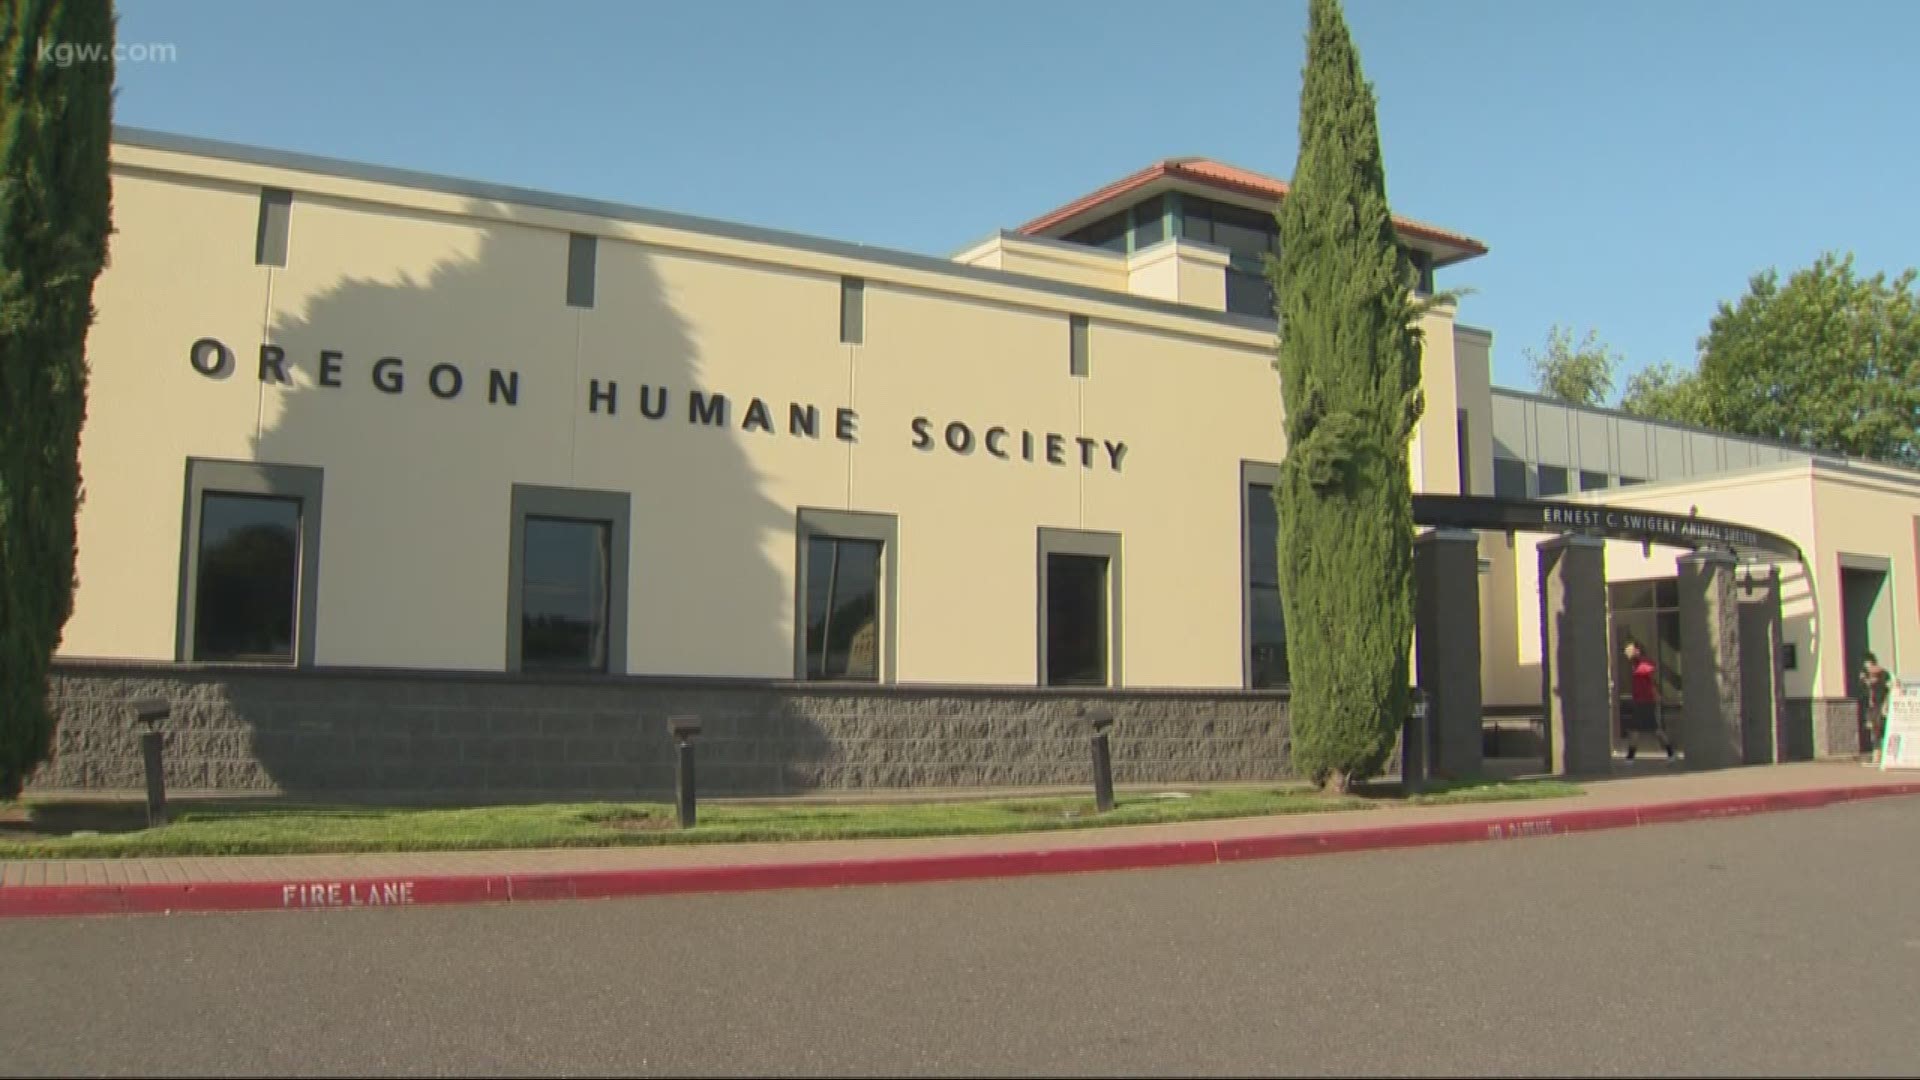 The Oregon Humane Society has temporarily put a stop to all dog adoptions after learning a group of dogs was exposed to dog flu.